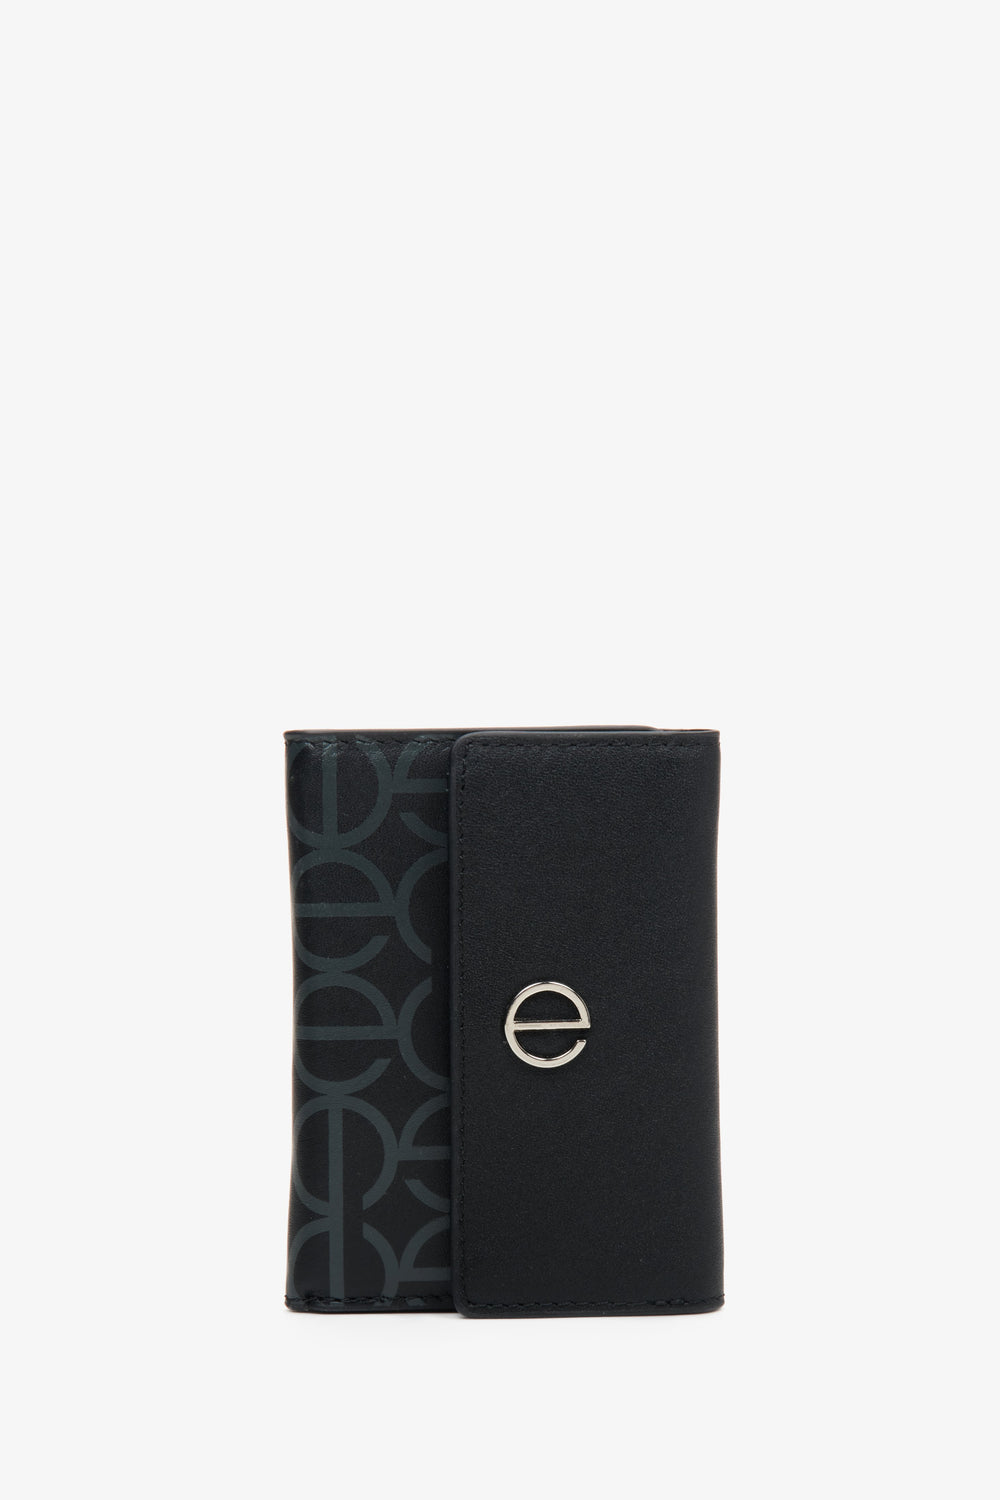 Medium Tri-Fold Women's Black Wallet made of Genuine Leather with Silver Accents Estro ER00113649.